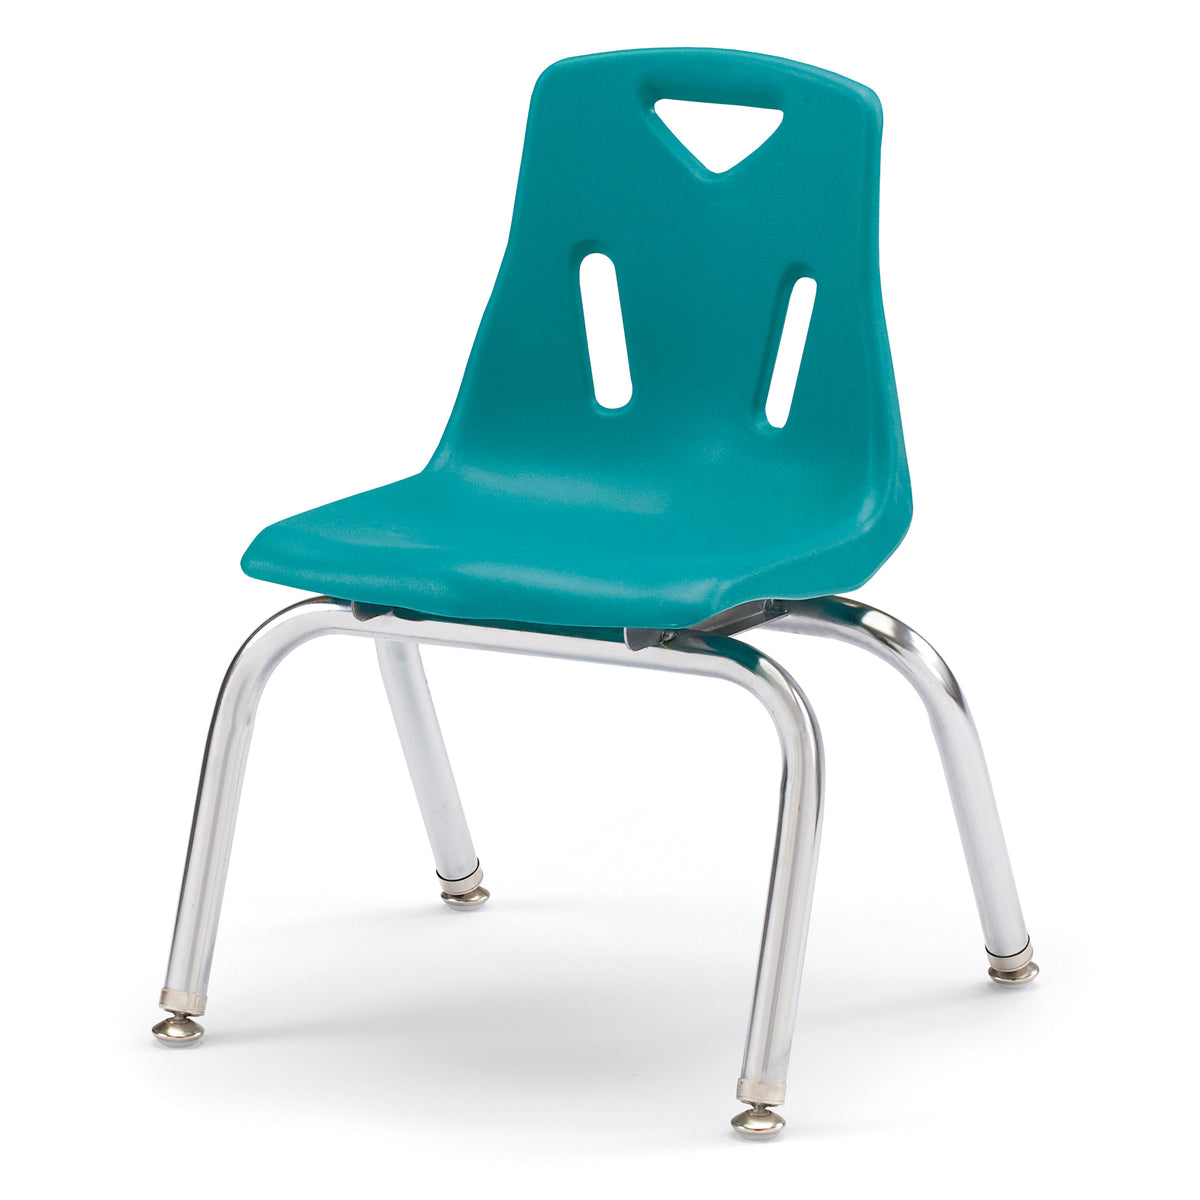 8142JC1005, Berries Stacking Chair with Chrome-Plated Legs - 12" Ht - Teal